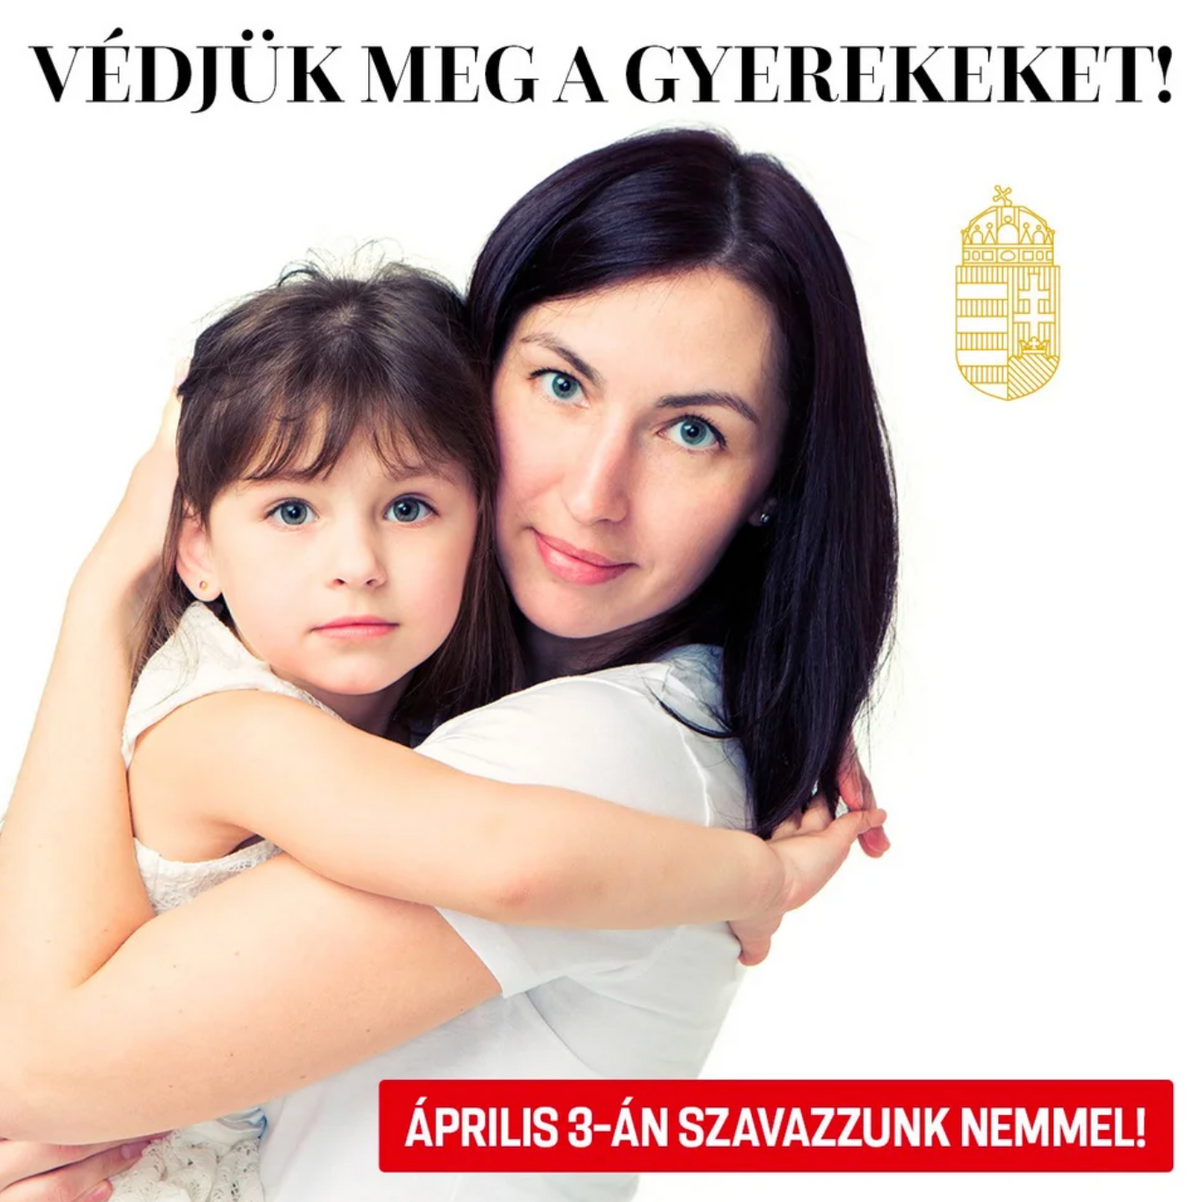 'Let's Protect the Children!' campaign poster from the Orbán government